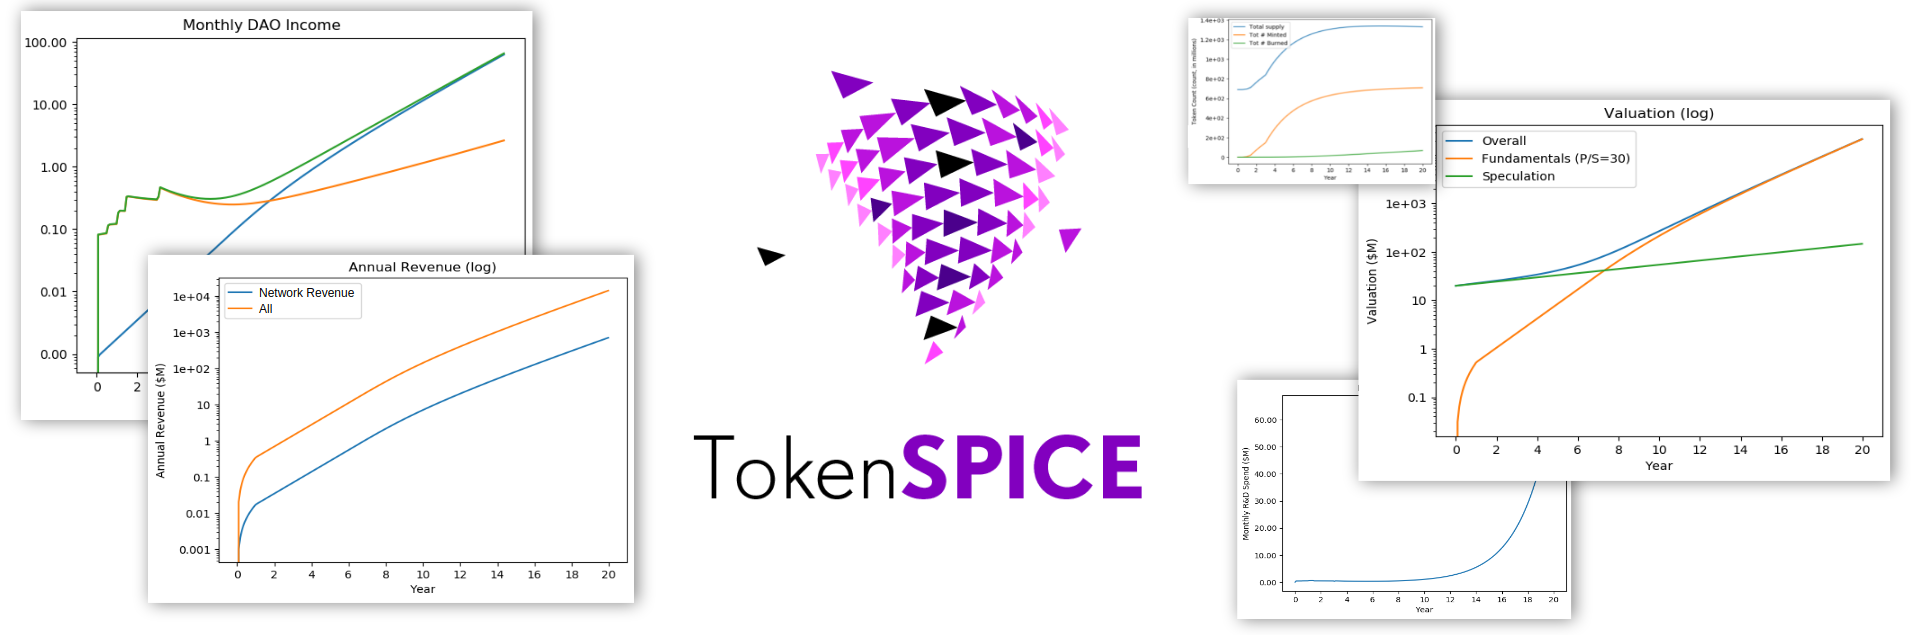 tokenspice-banner-thin.png